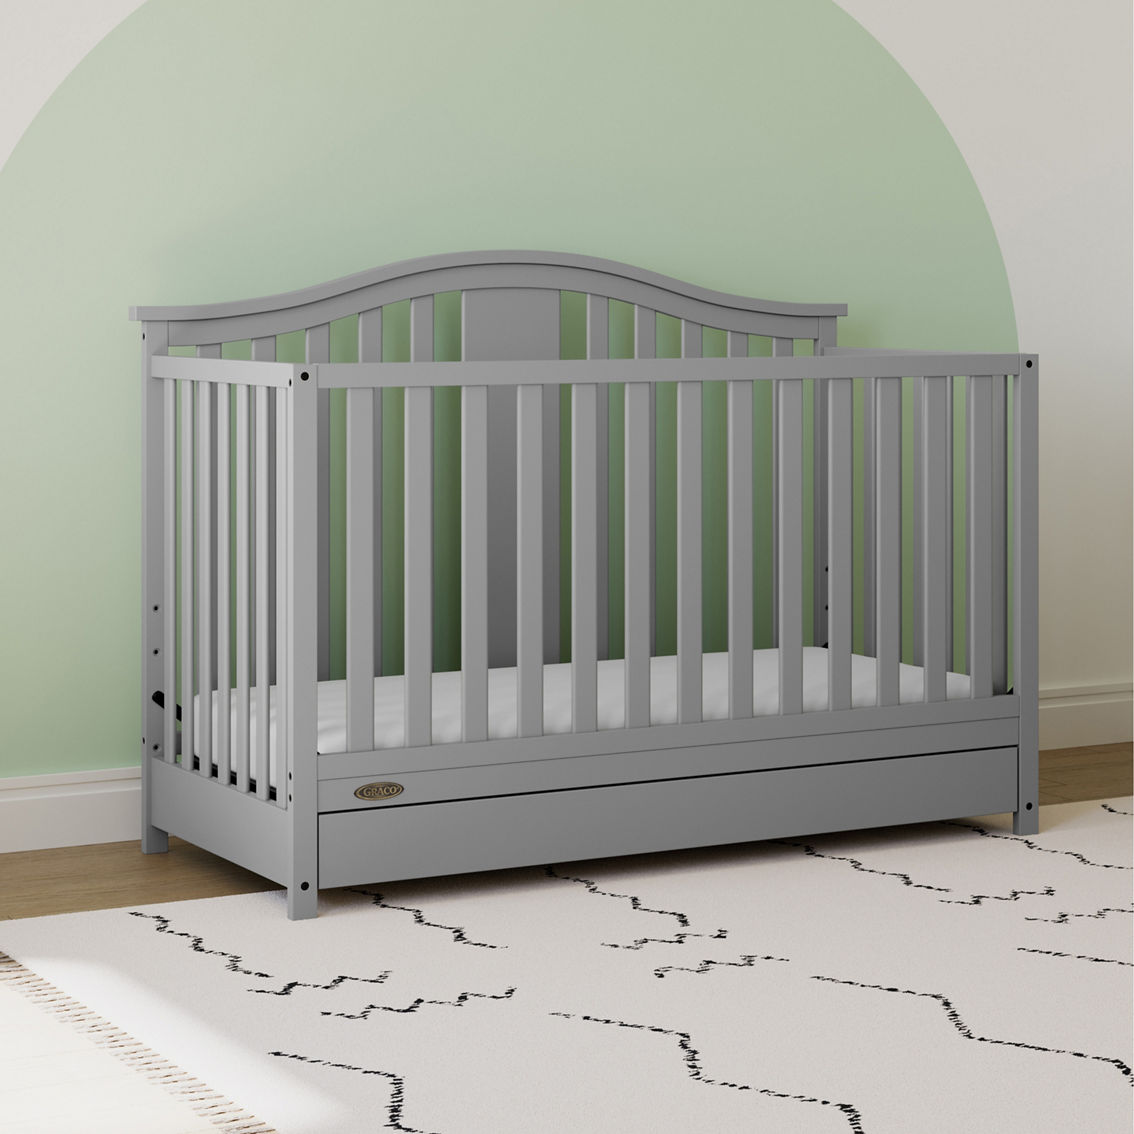 Graco Solano 4-in-1 Convertible Crib with Drawer - Image 5 of 5